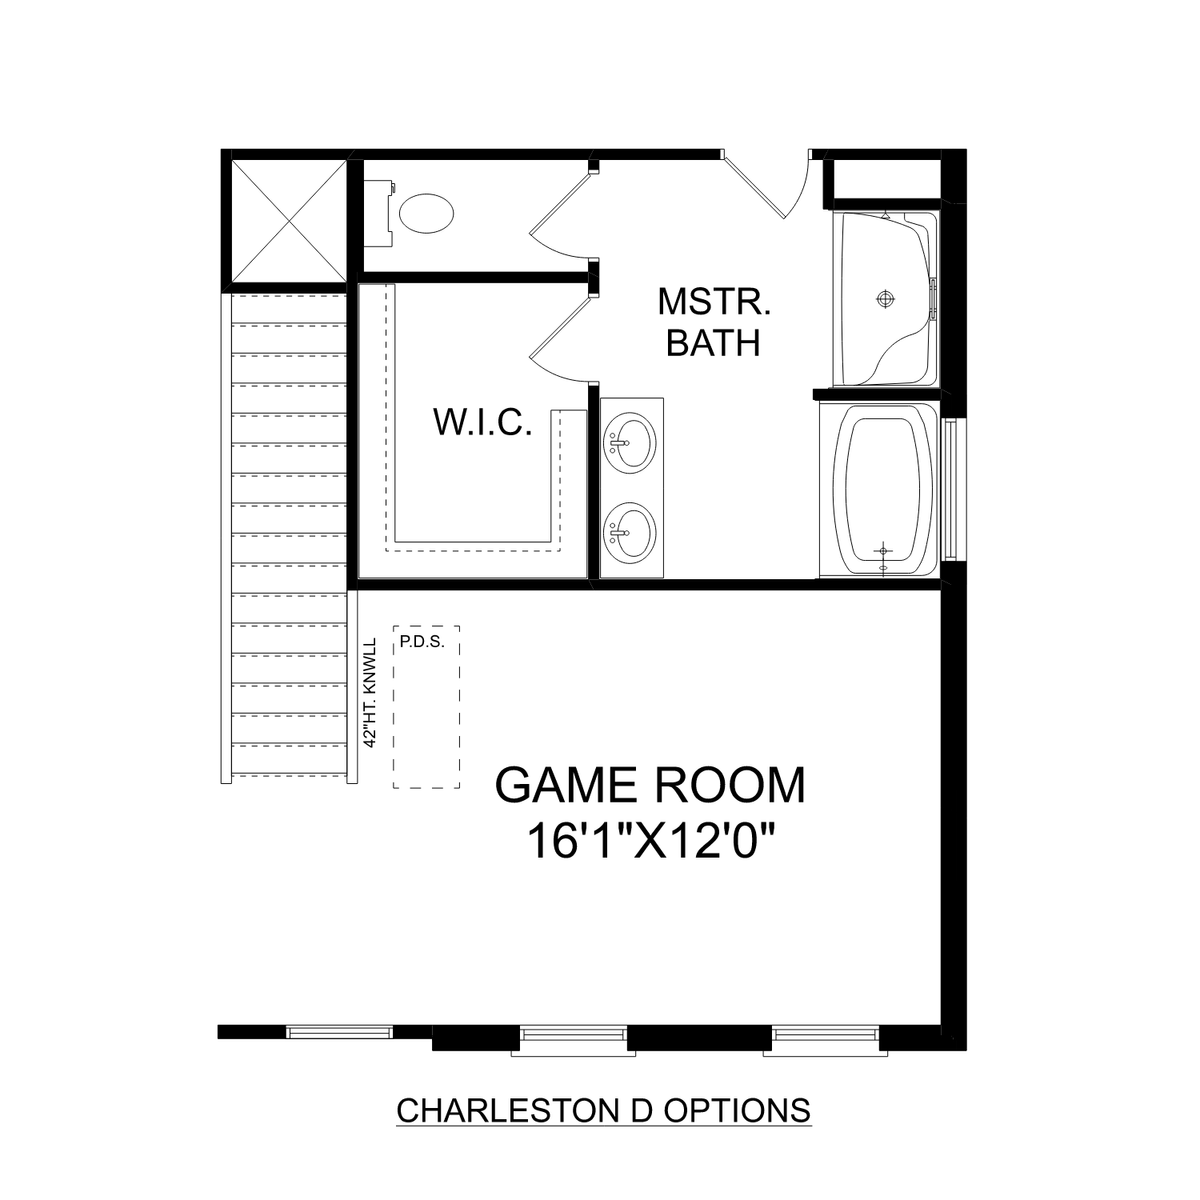 3 - The Charleston D buildable floor plan layout in Davidson Homes' Walker's Hill community.